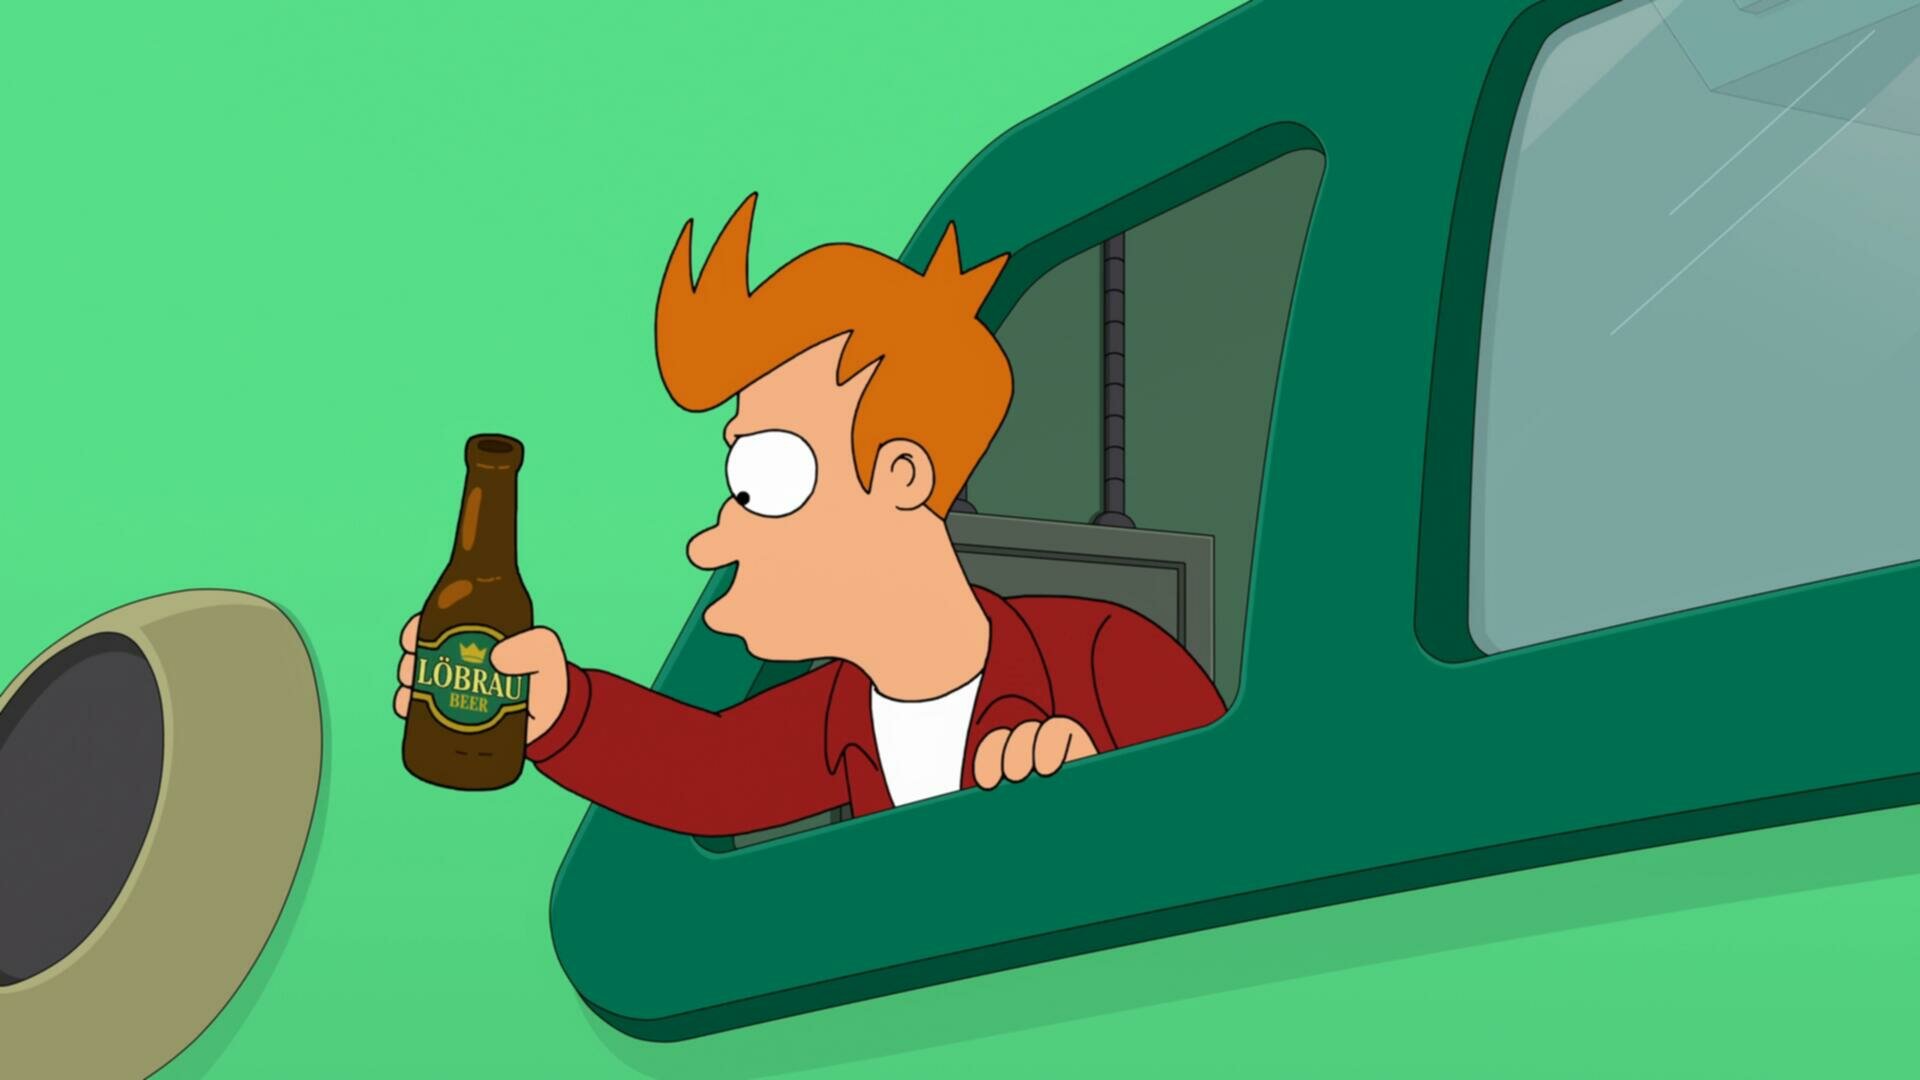 Futurama S08E05 Related to Items Youve Viewed 1080p DSNP WEB DL DDP5 1 H 264 NTb TGx